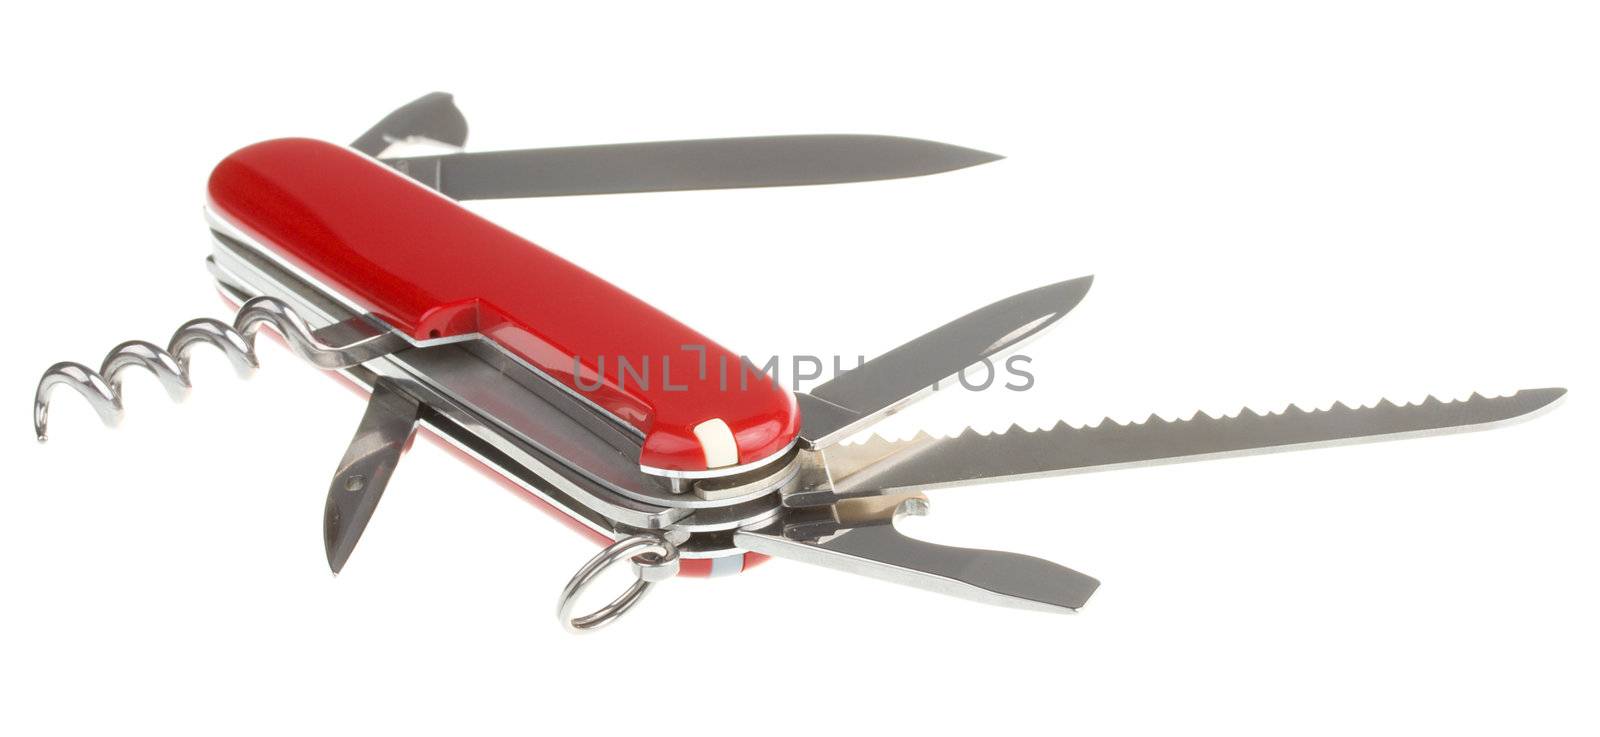 close-up opened penknife, isolated on white